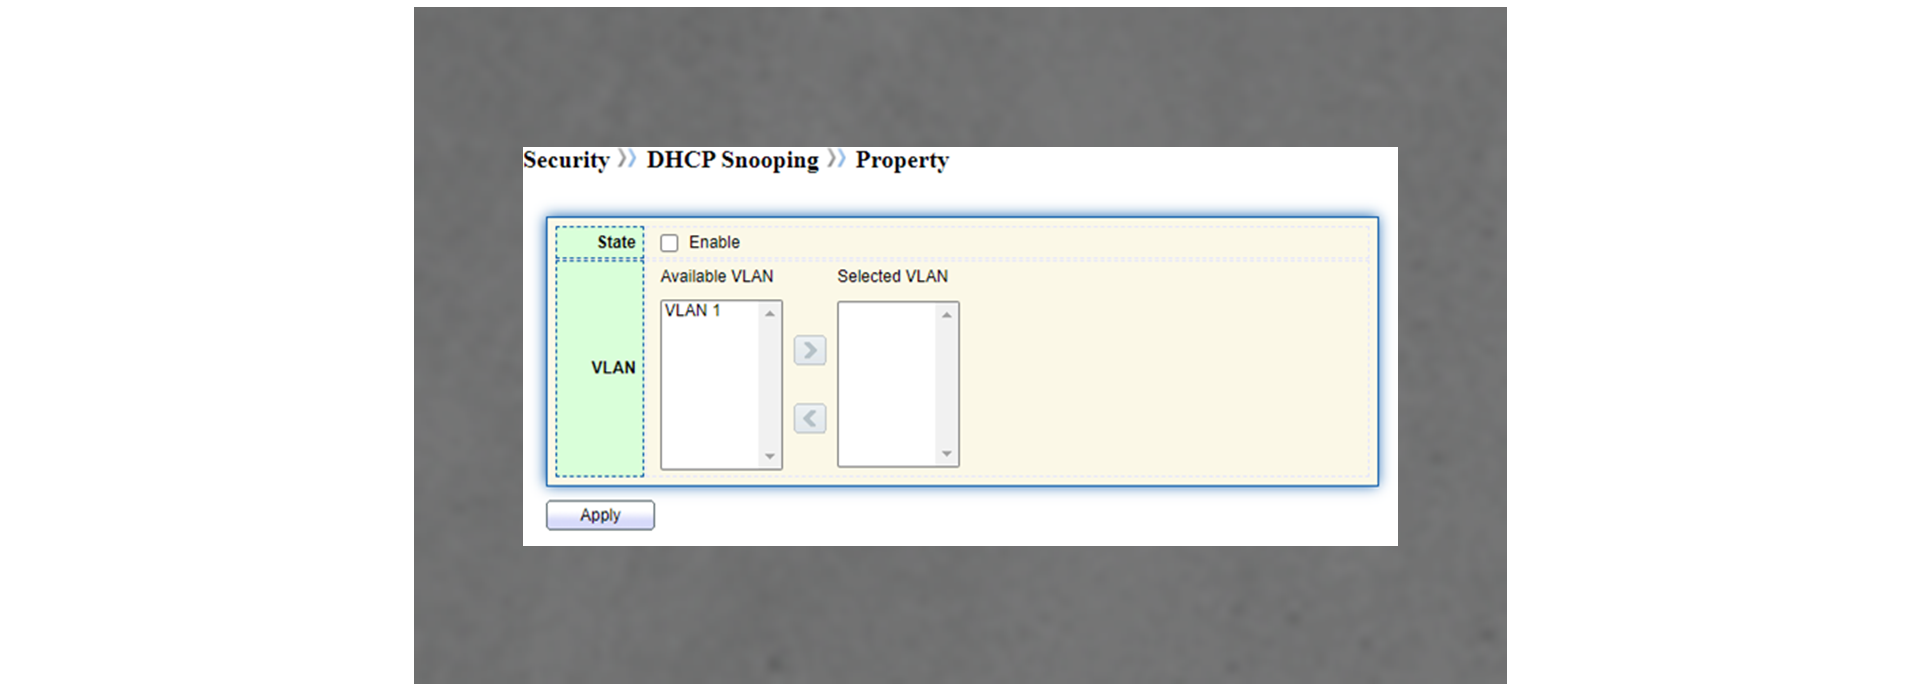 DHCP Snooping Support